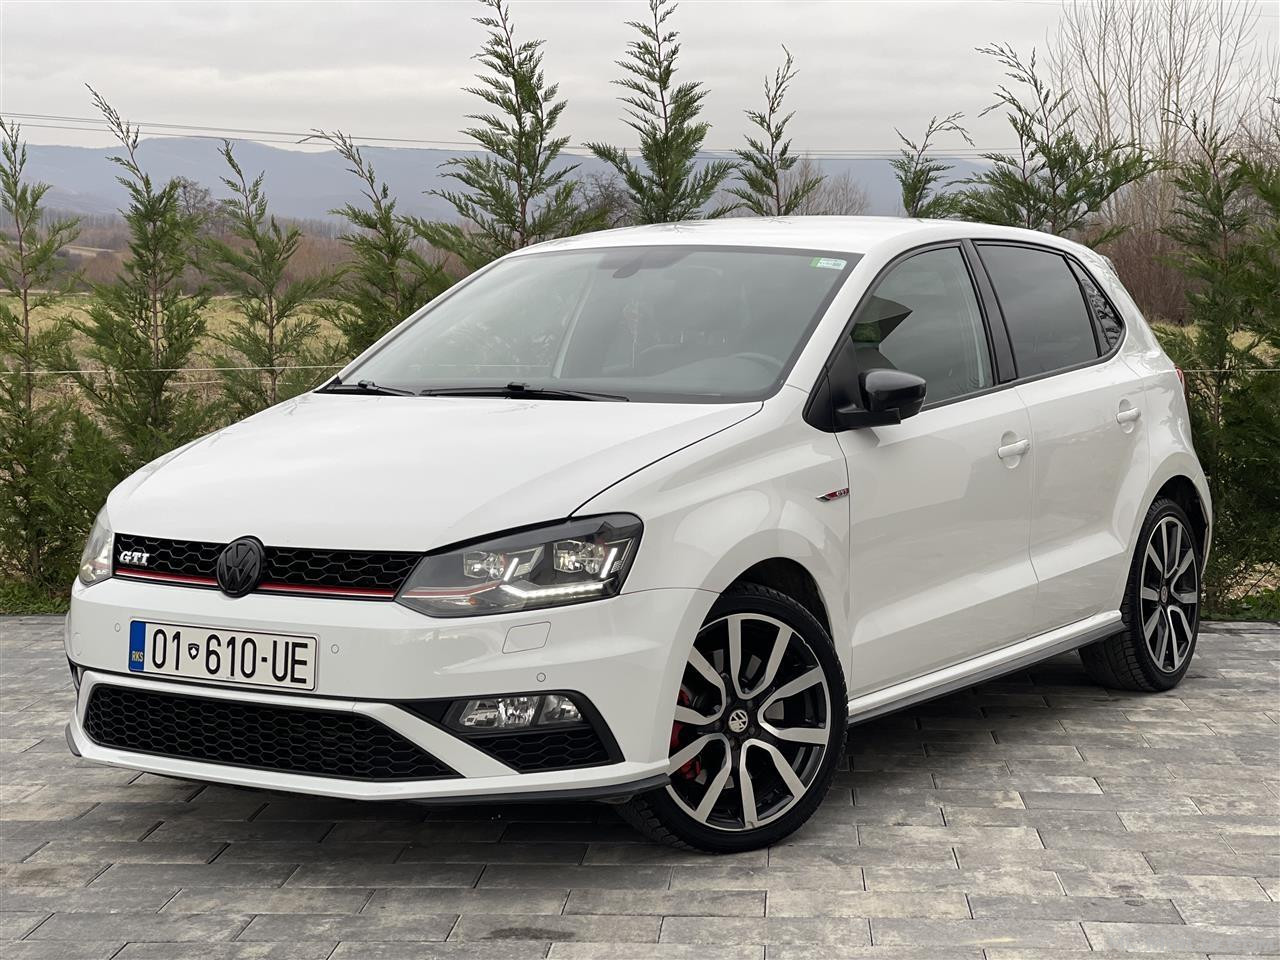 Polo “origjinal GTI ⭕️” 1.8 TSI 192 ps Sound System ? 